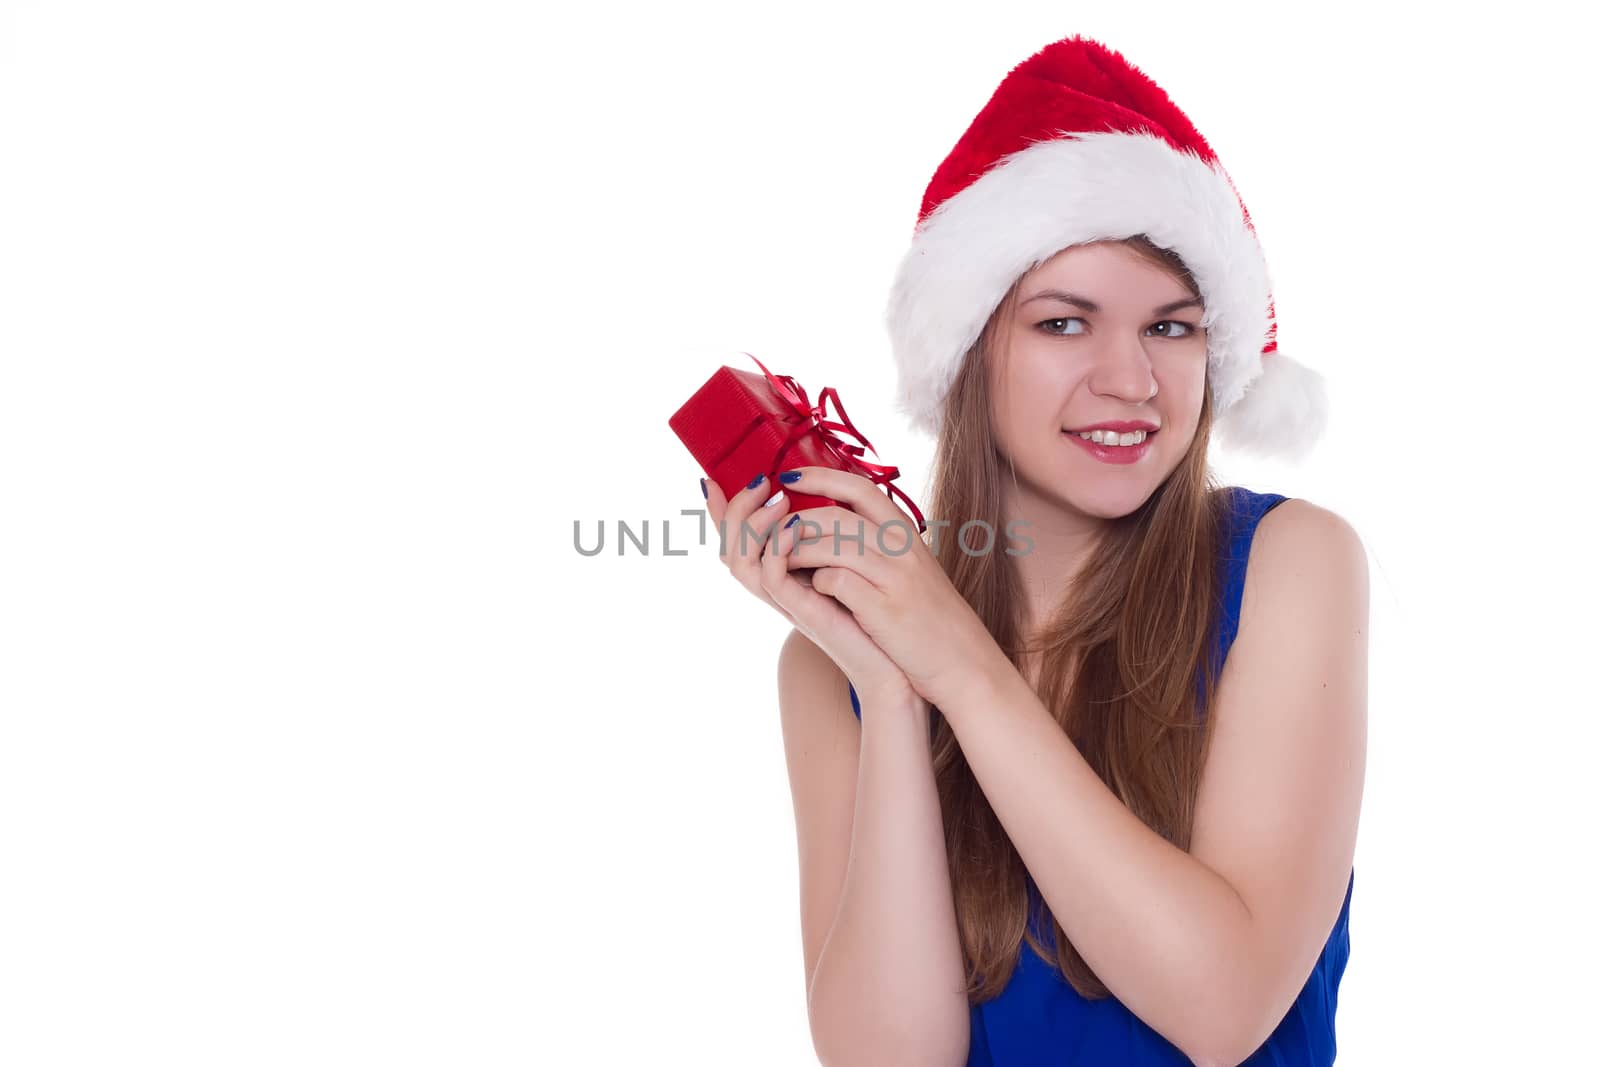 girl in a Christmas cap gift to rejoice on white background.